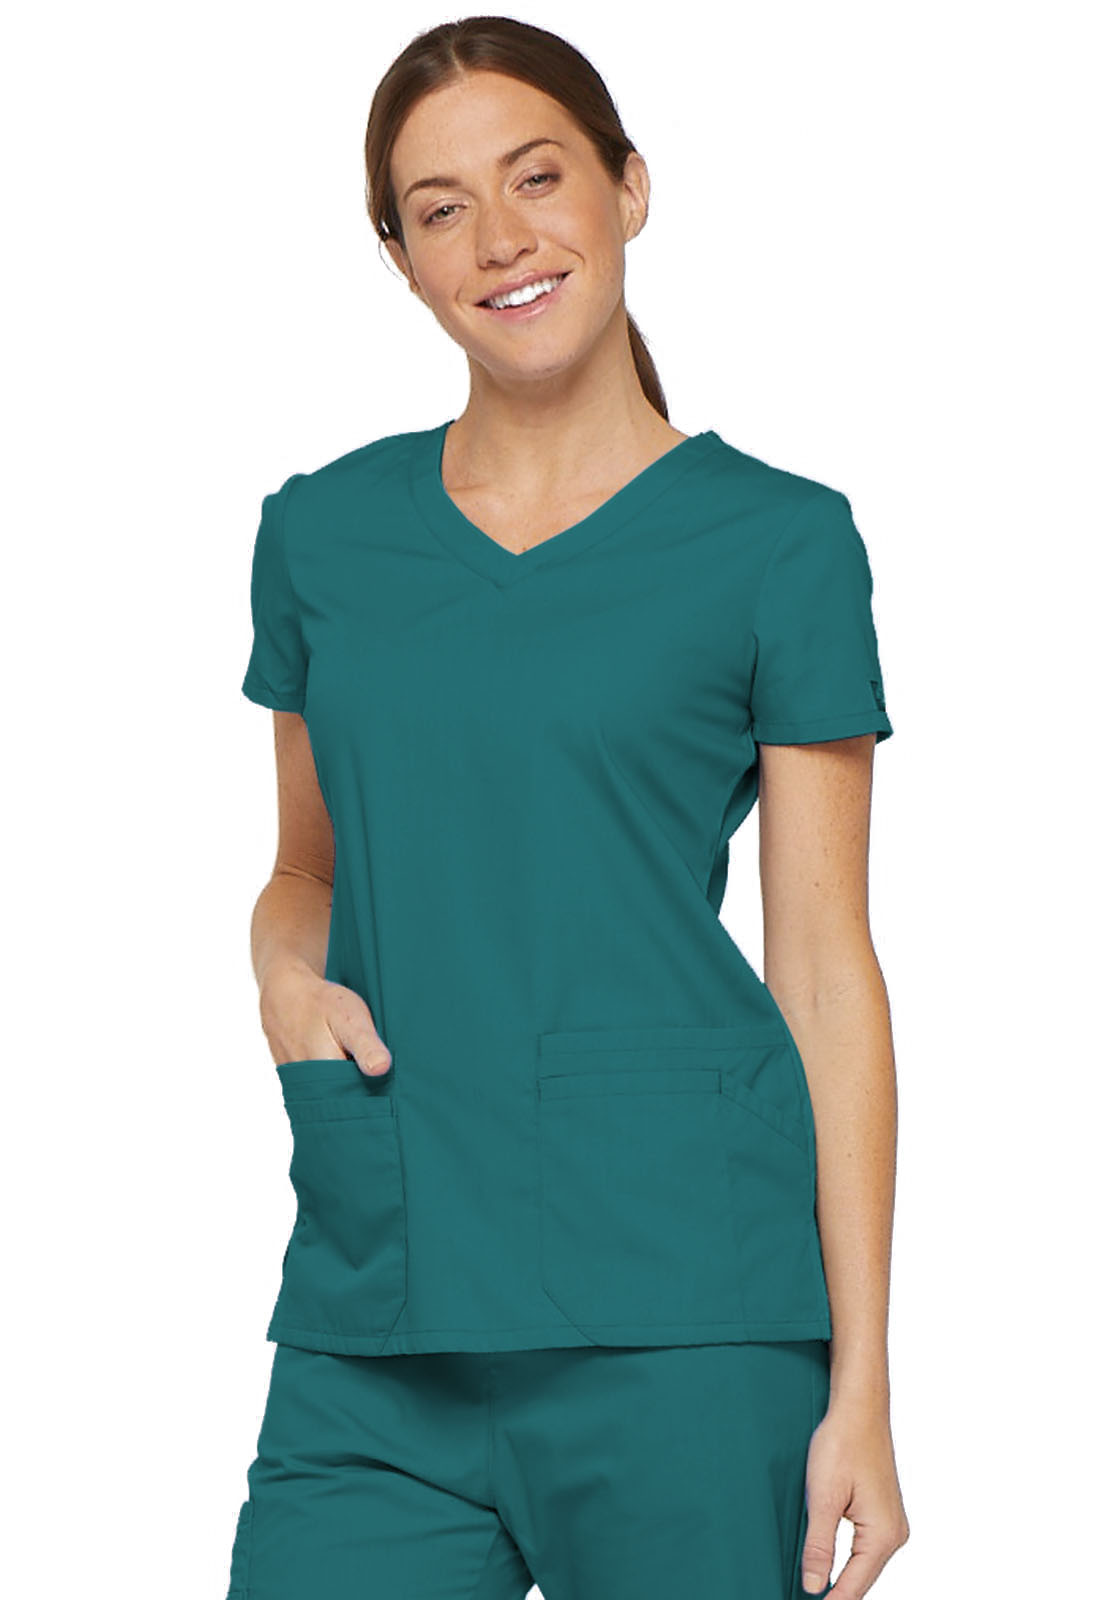 EDS Signature V-Neck Top in Teal Blue 85906-TLWZ from Uniforms Express